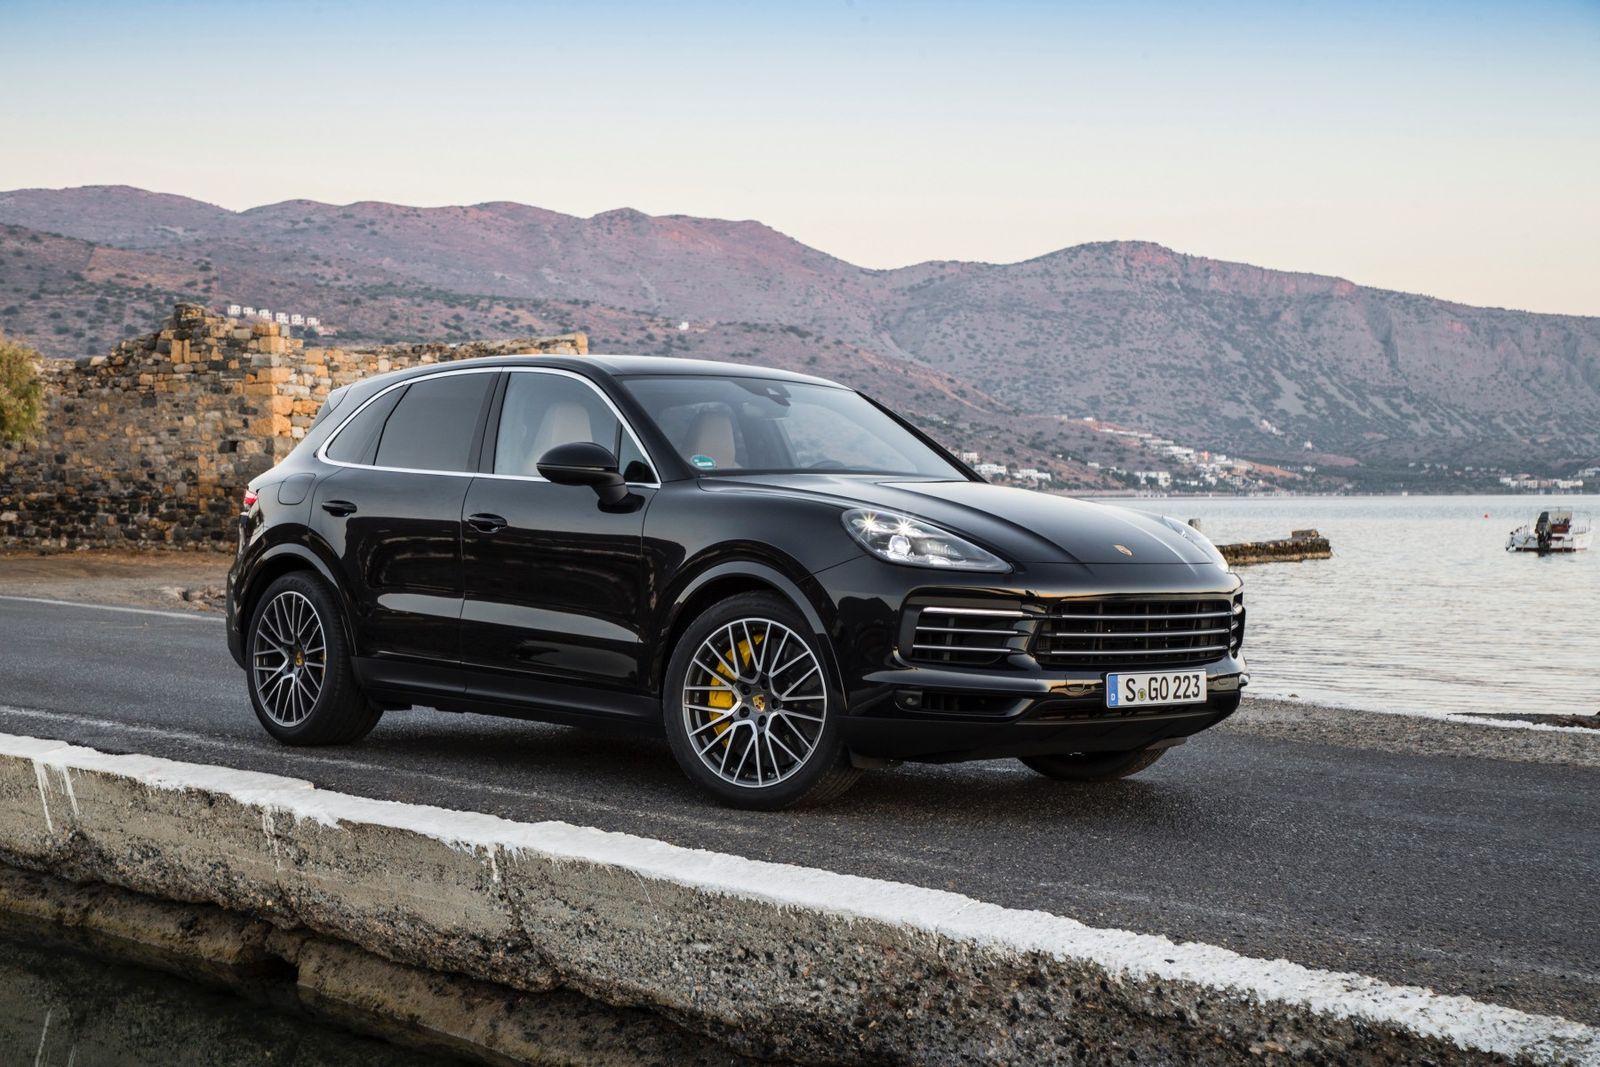 2018 Porsche Cayenne S Review The Complete Mean Machine Drivemag Cars